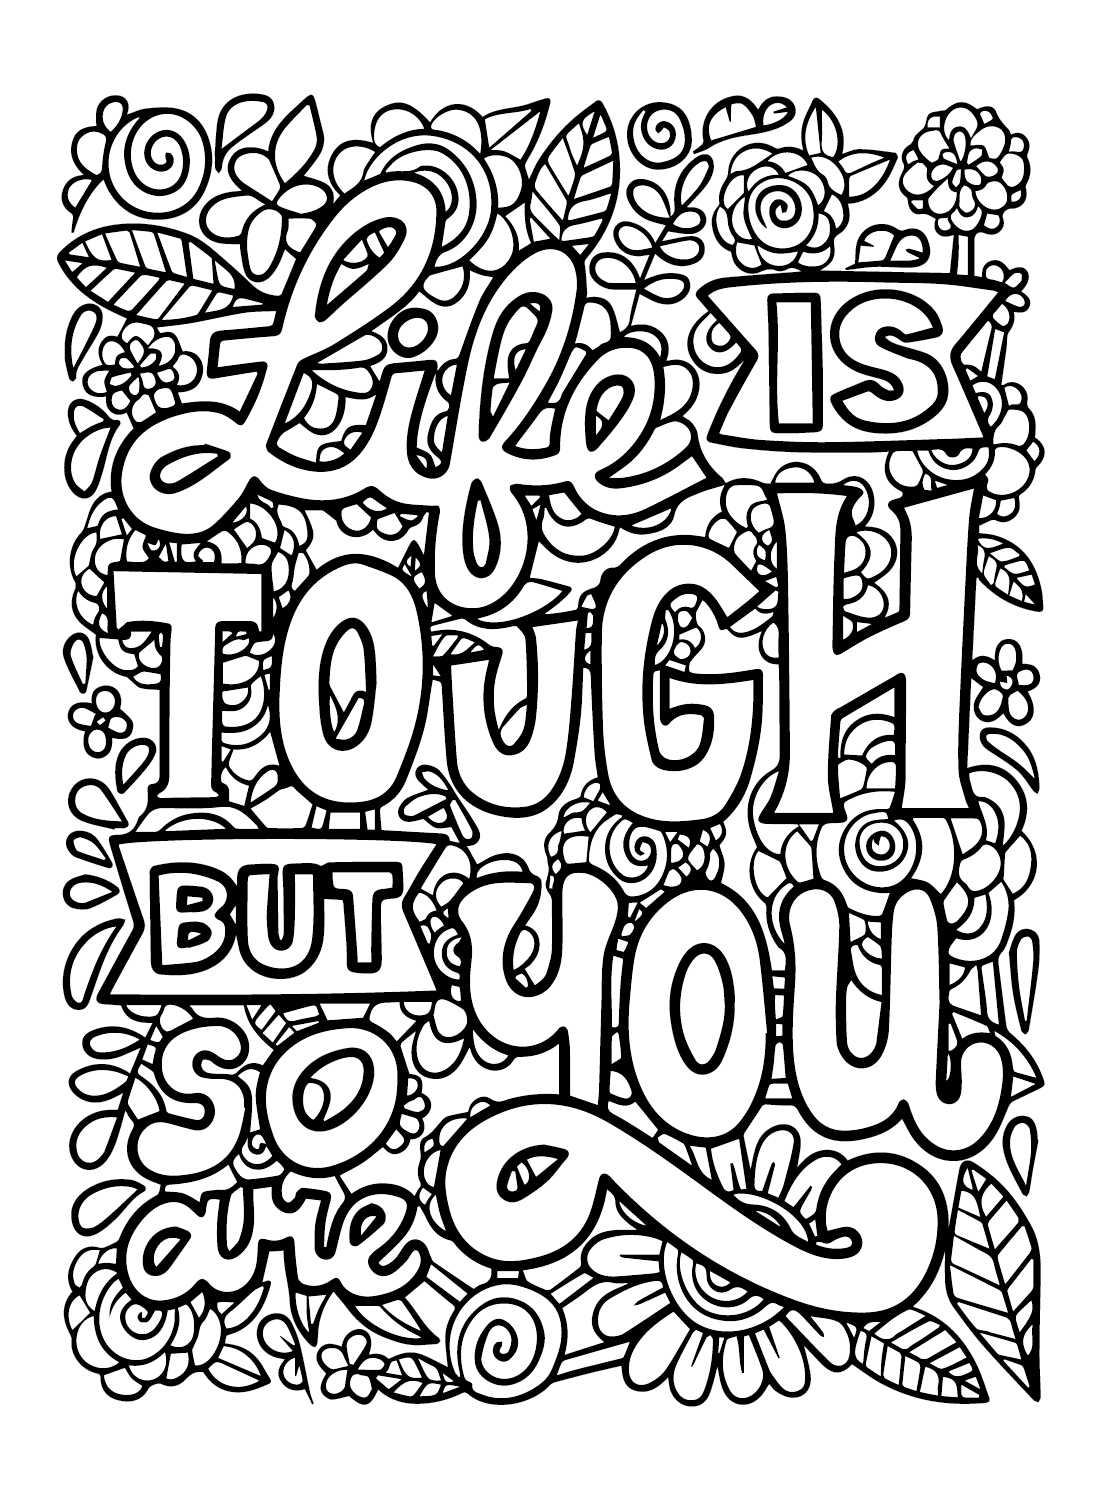 Inspirational coloring pages printable for free download